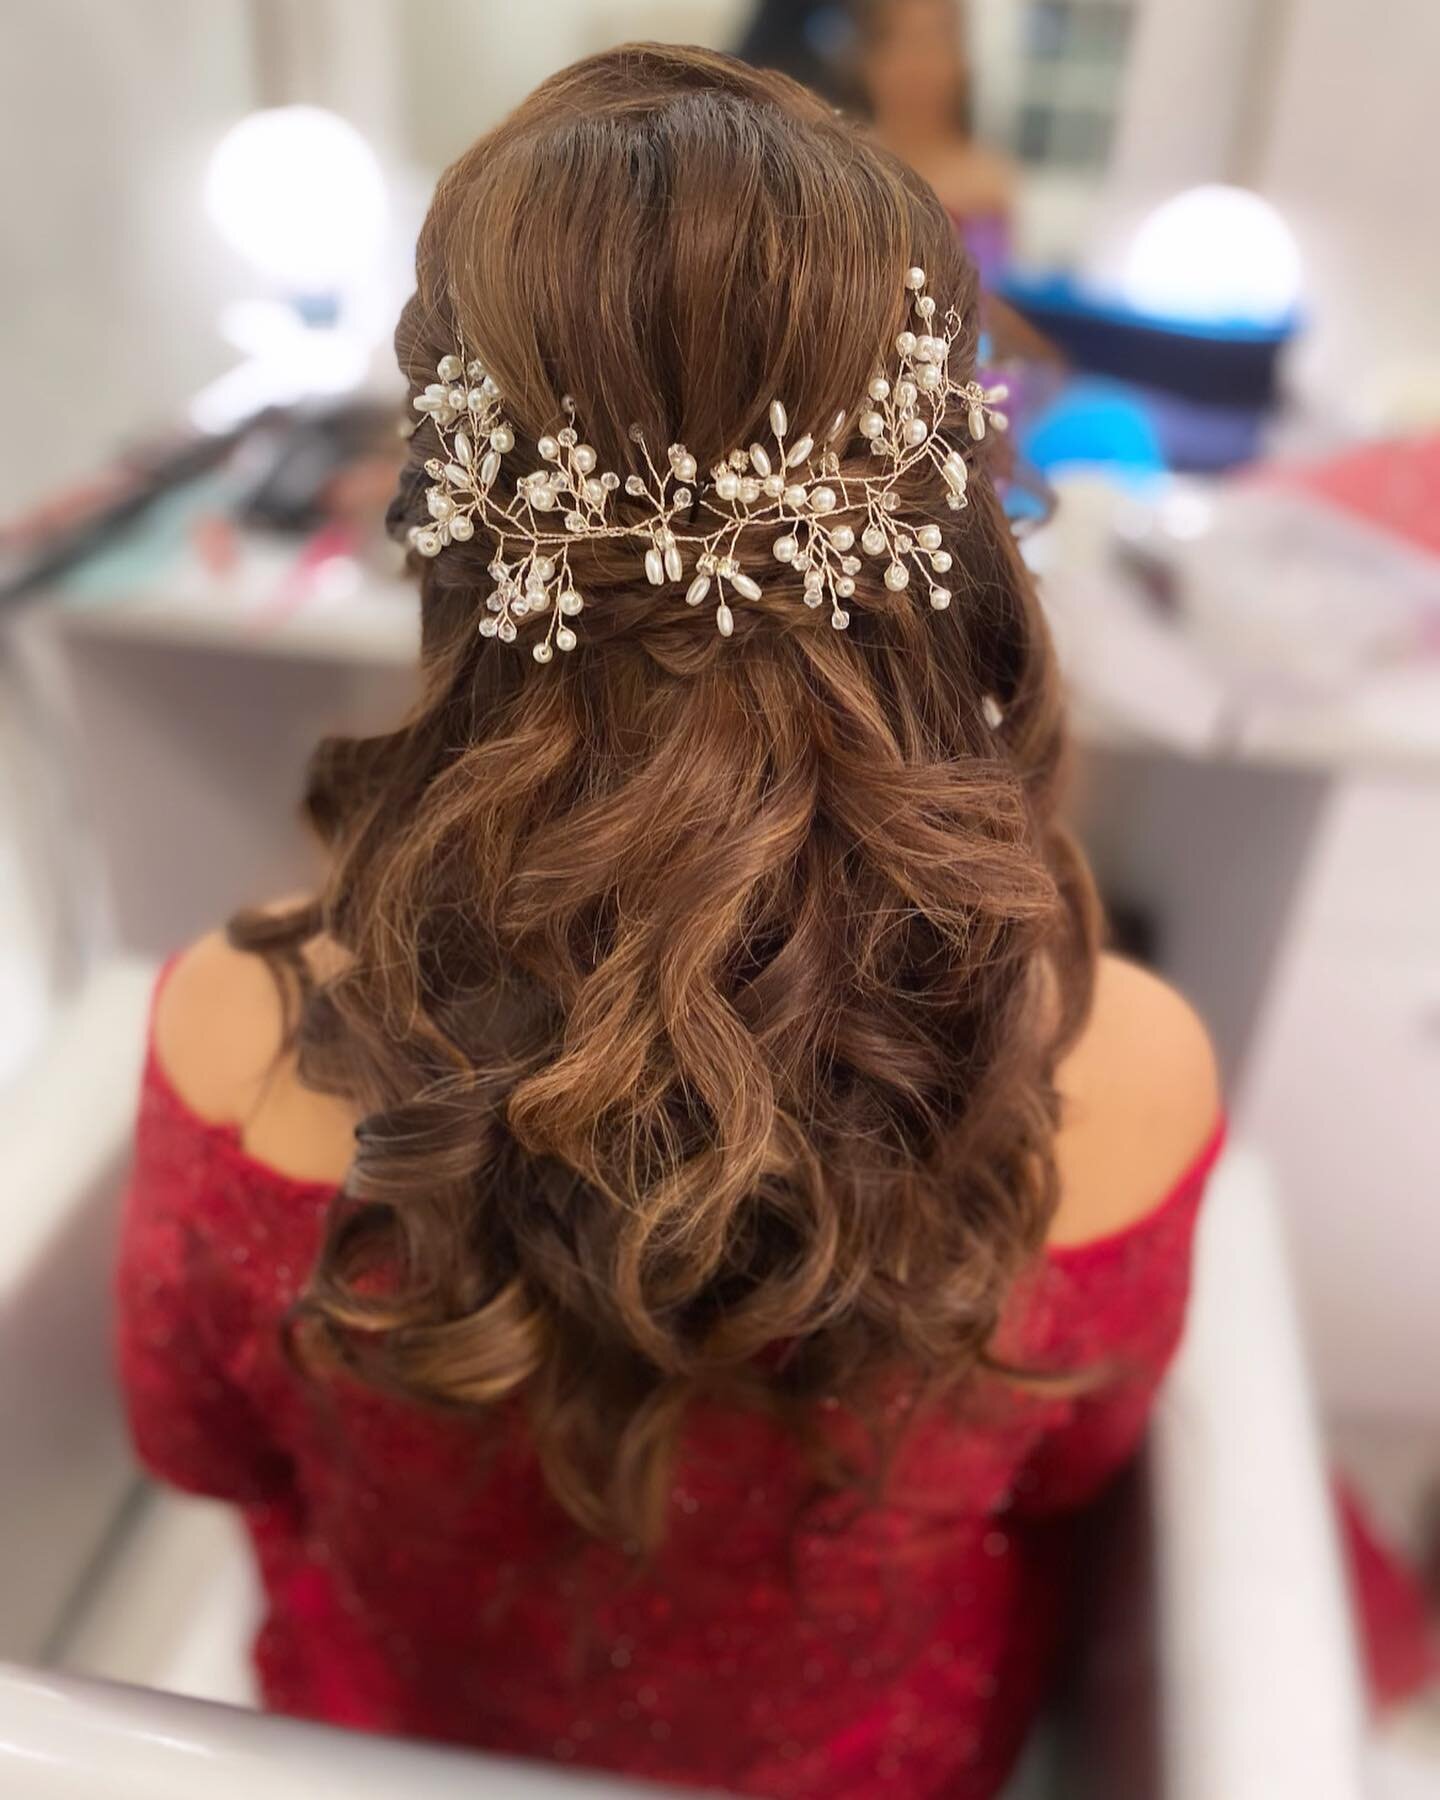 Half-up, Half-down bridesmaid hairstyle. 

One of the most frequently asked questions is where clients can get hair accessories? We recommend the following: 

▫️@clairesstores
▫️ @etsy 
▫️ @Amazon

All three vendors have a variety of hair accessories